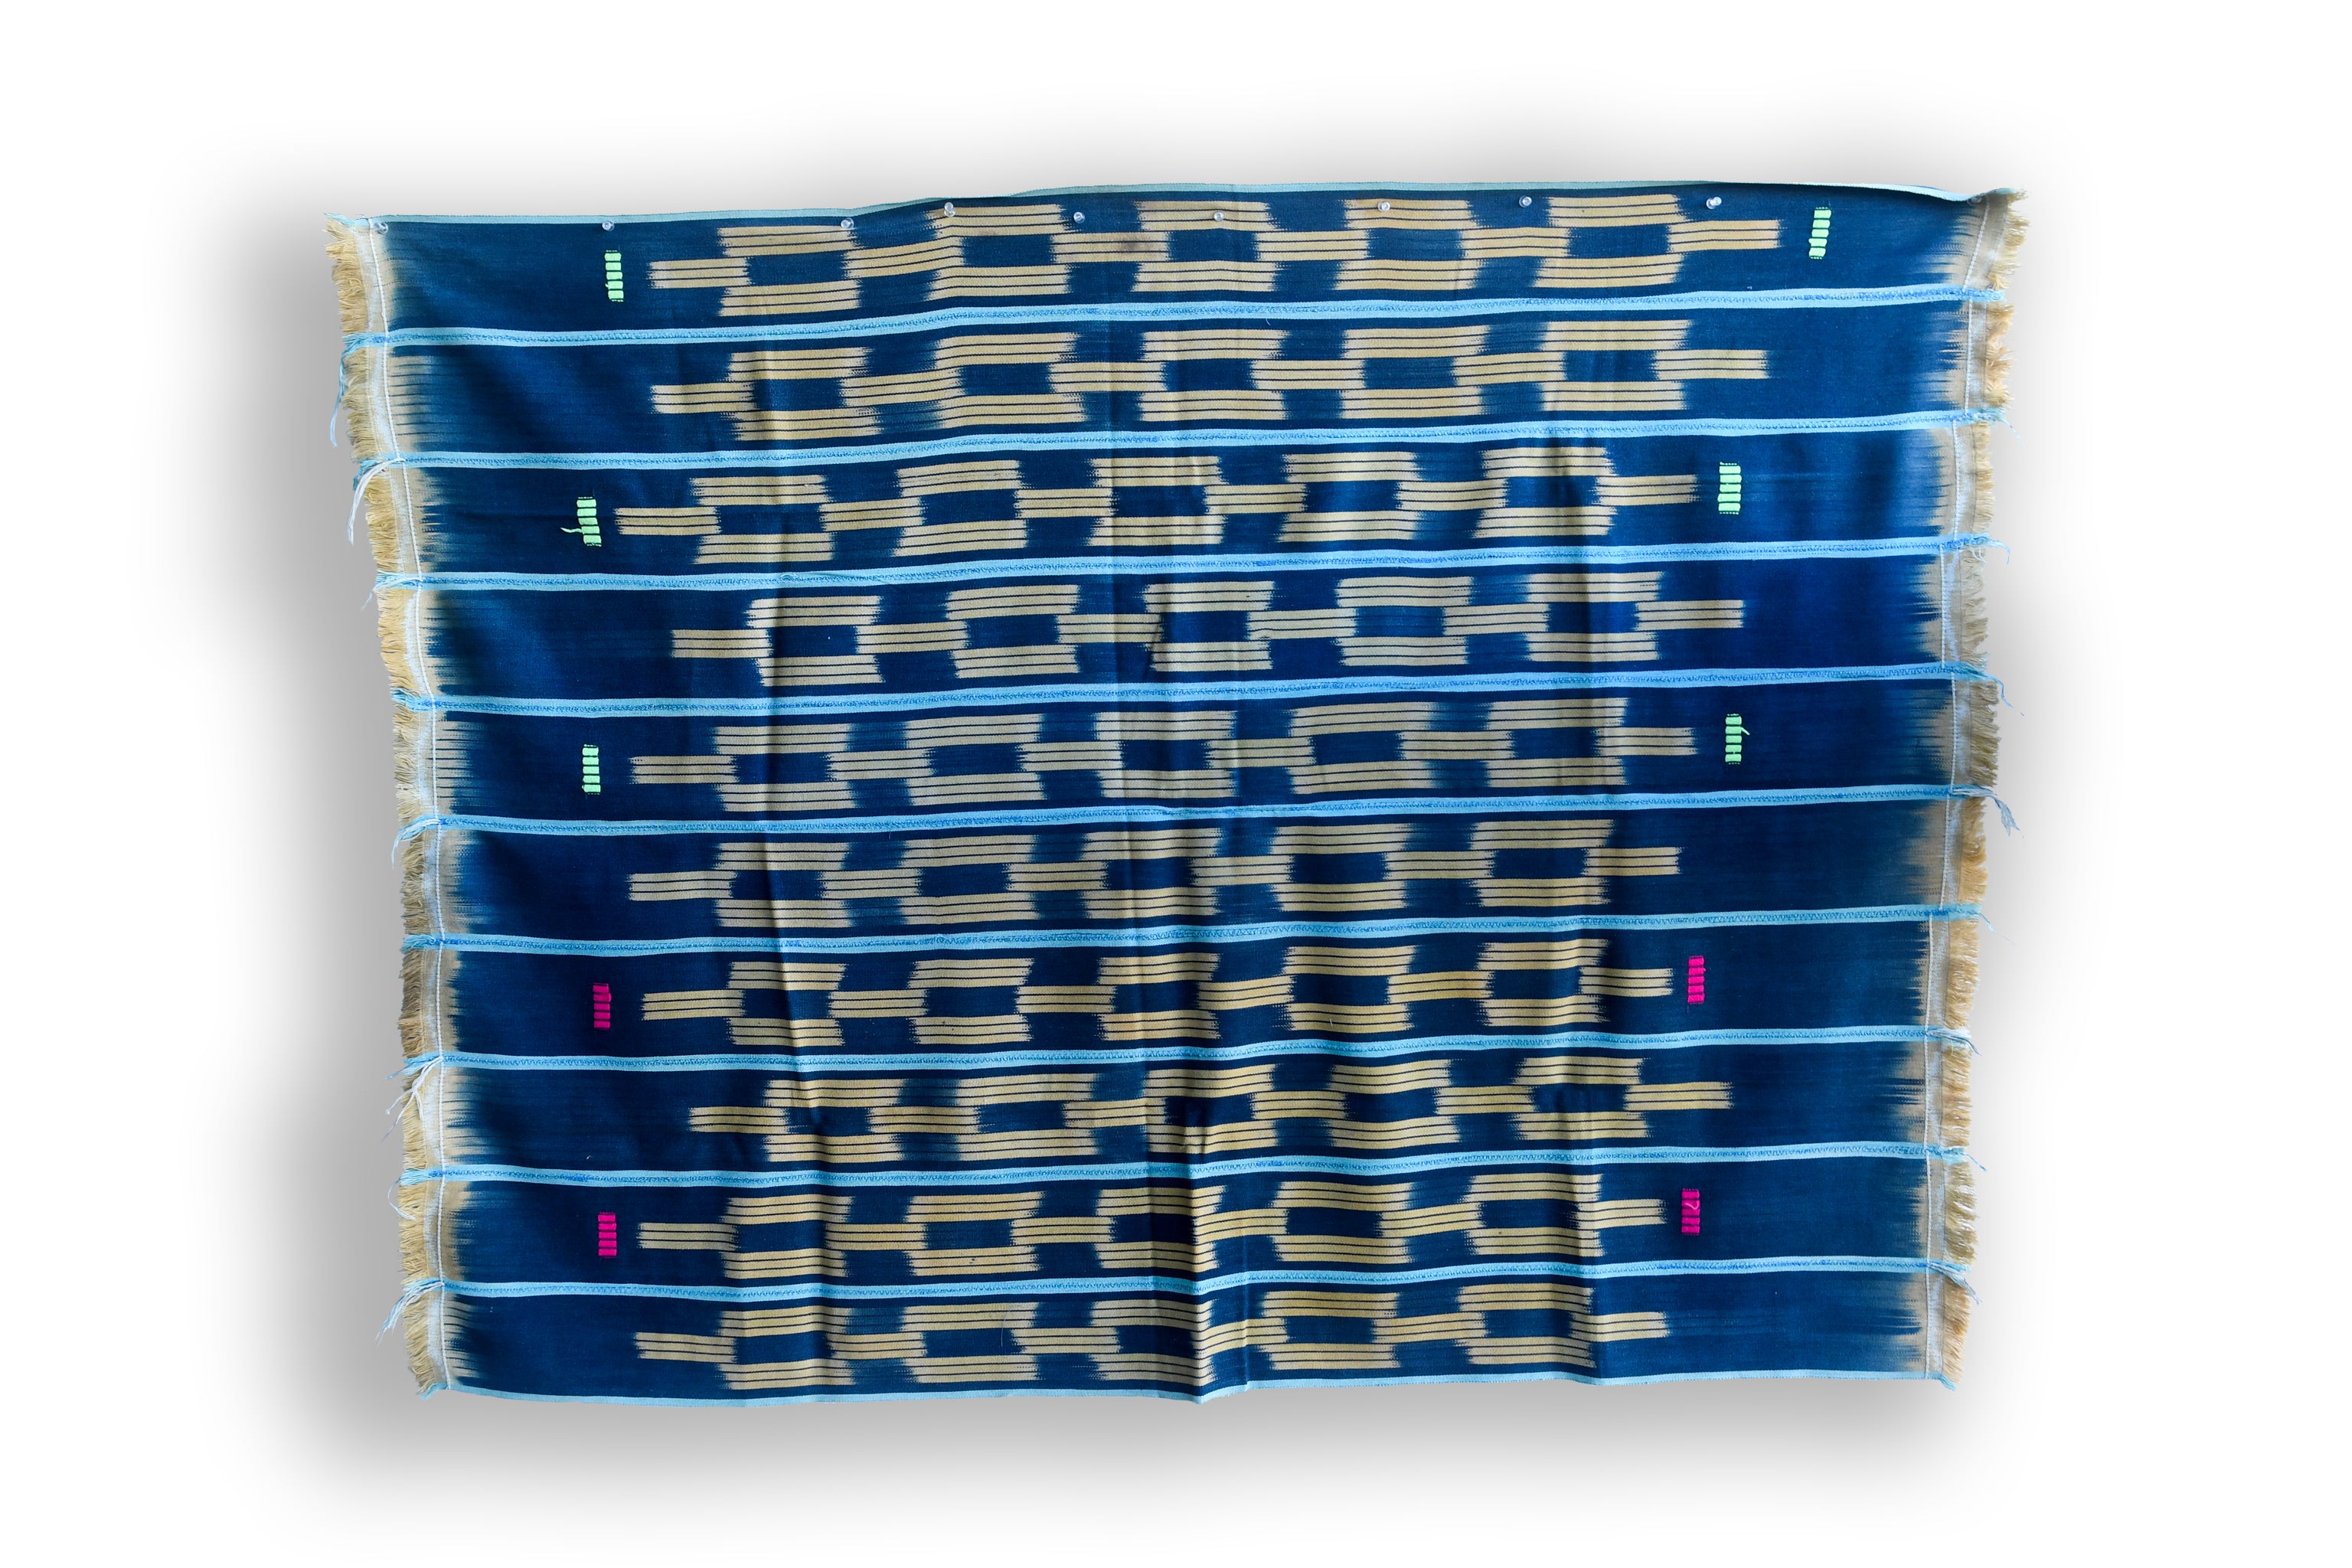 Handcrafted Textiles - Handmade - Contemporary - African Art - Home Decor - Living - Indigo Tie Dyed Ikat Fabric - Crafted African Cotton Textile - Vintage Baule Design